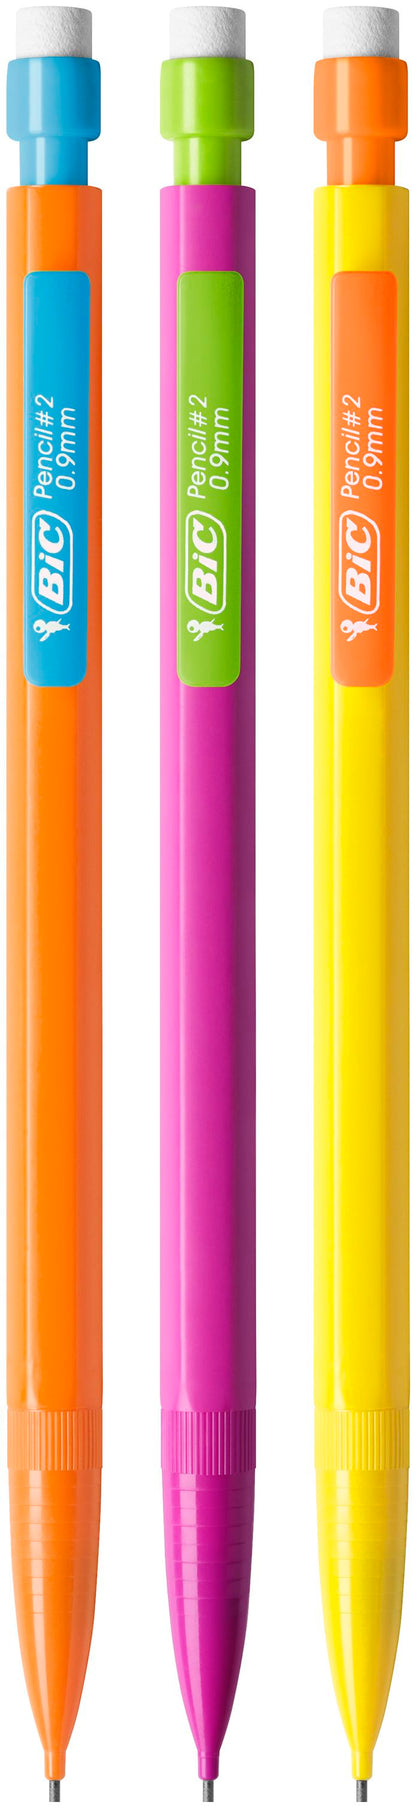 Bic Matic Strong Mechanical Pencil HB 0.9mm Lead Assorted Colour Barrel (Pack 12) - 892271